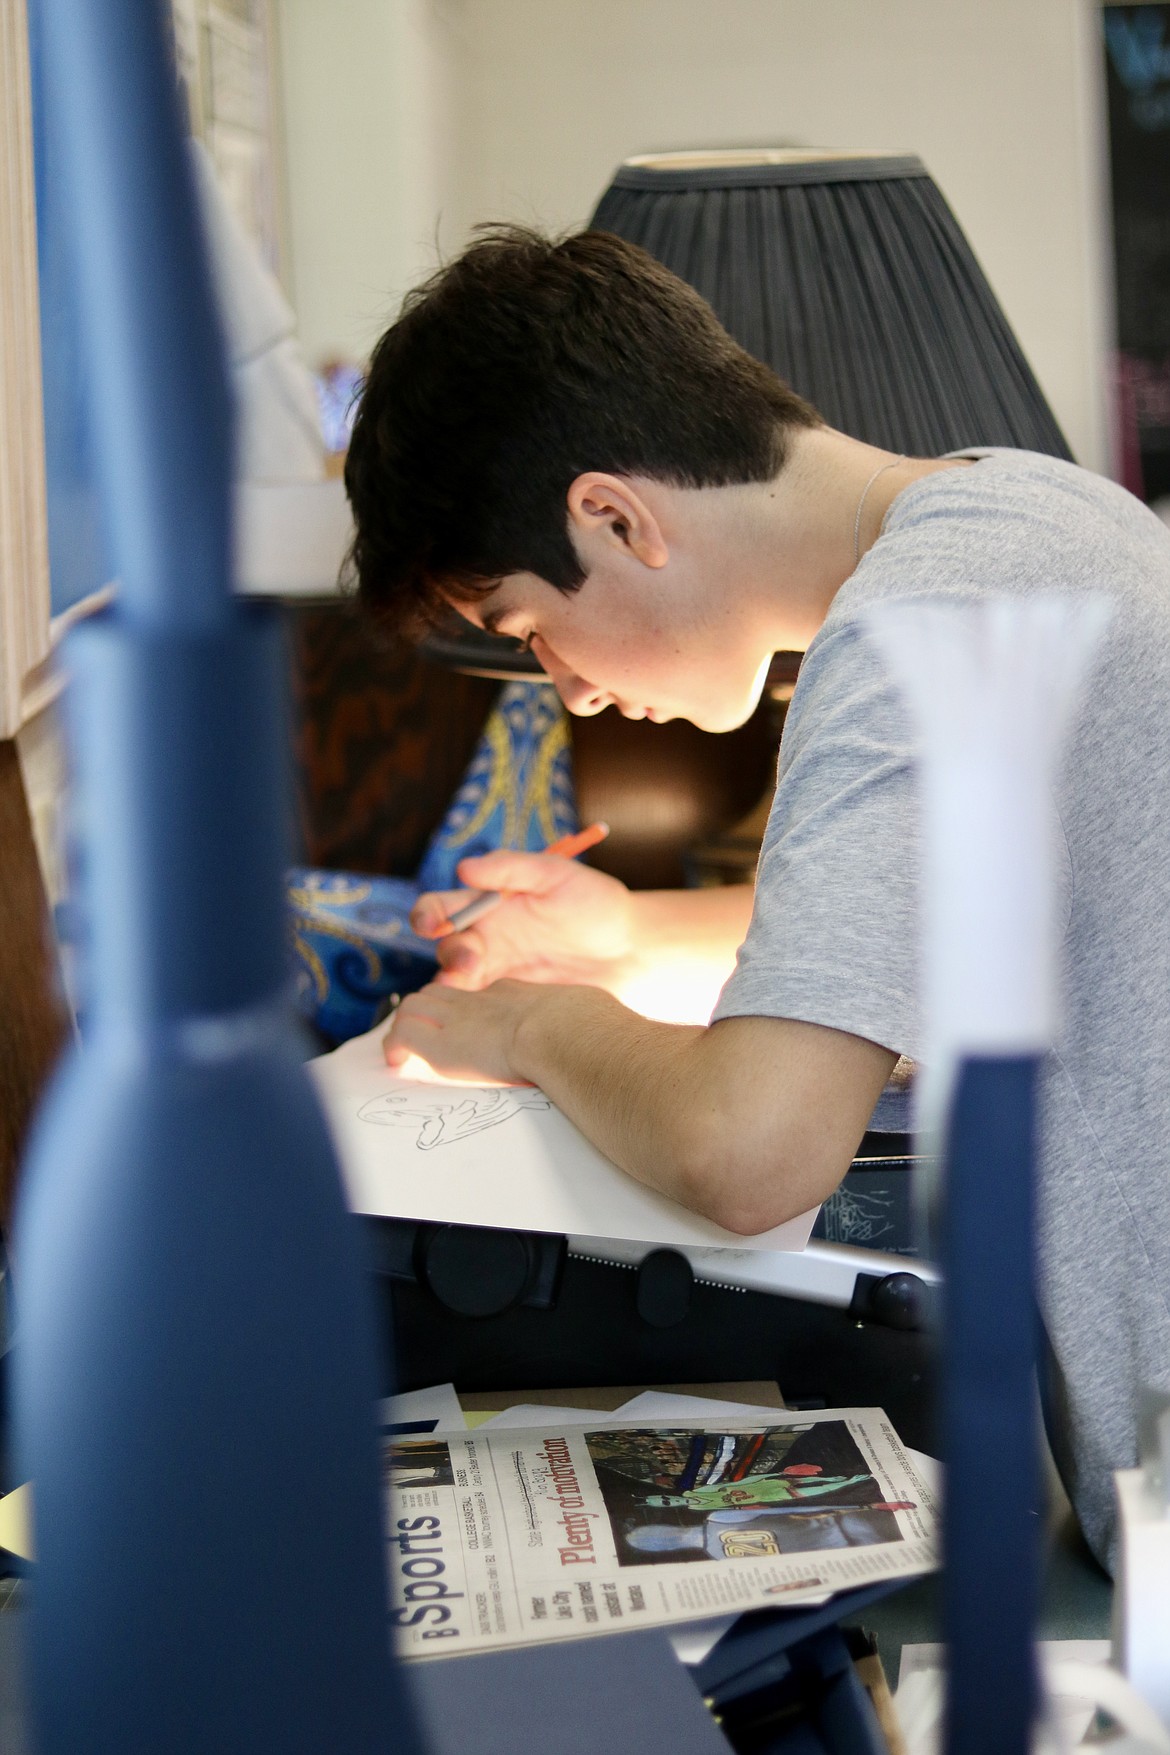 Liam McNamara, a tenth grader at Lake City High School, works on an art project for class. The week prior they used newspapers for a lesson on ethics in art, changing the photos at least 50% to make it their own. HANNAH NEFF/Press